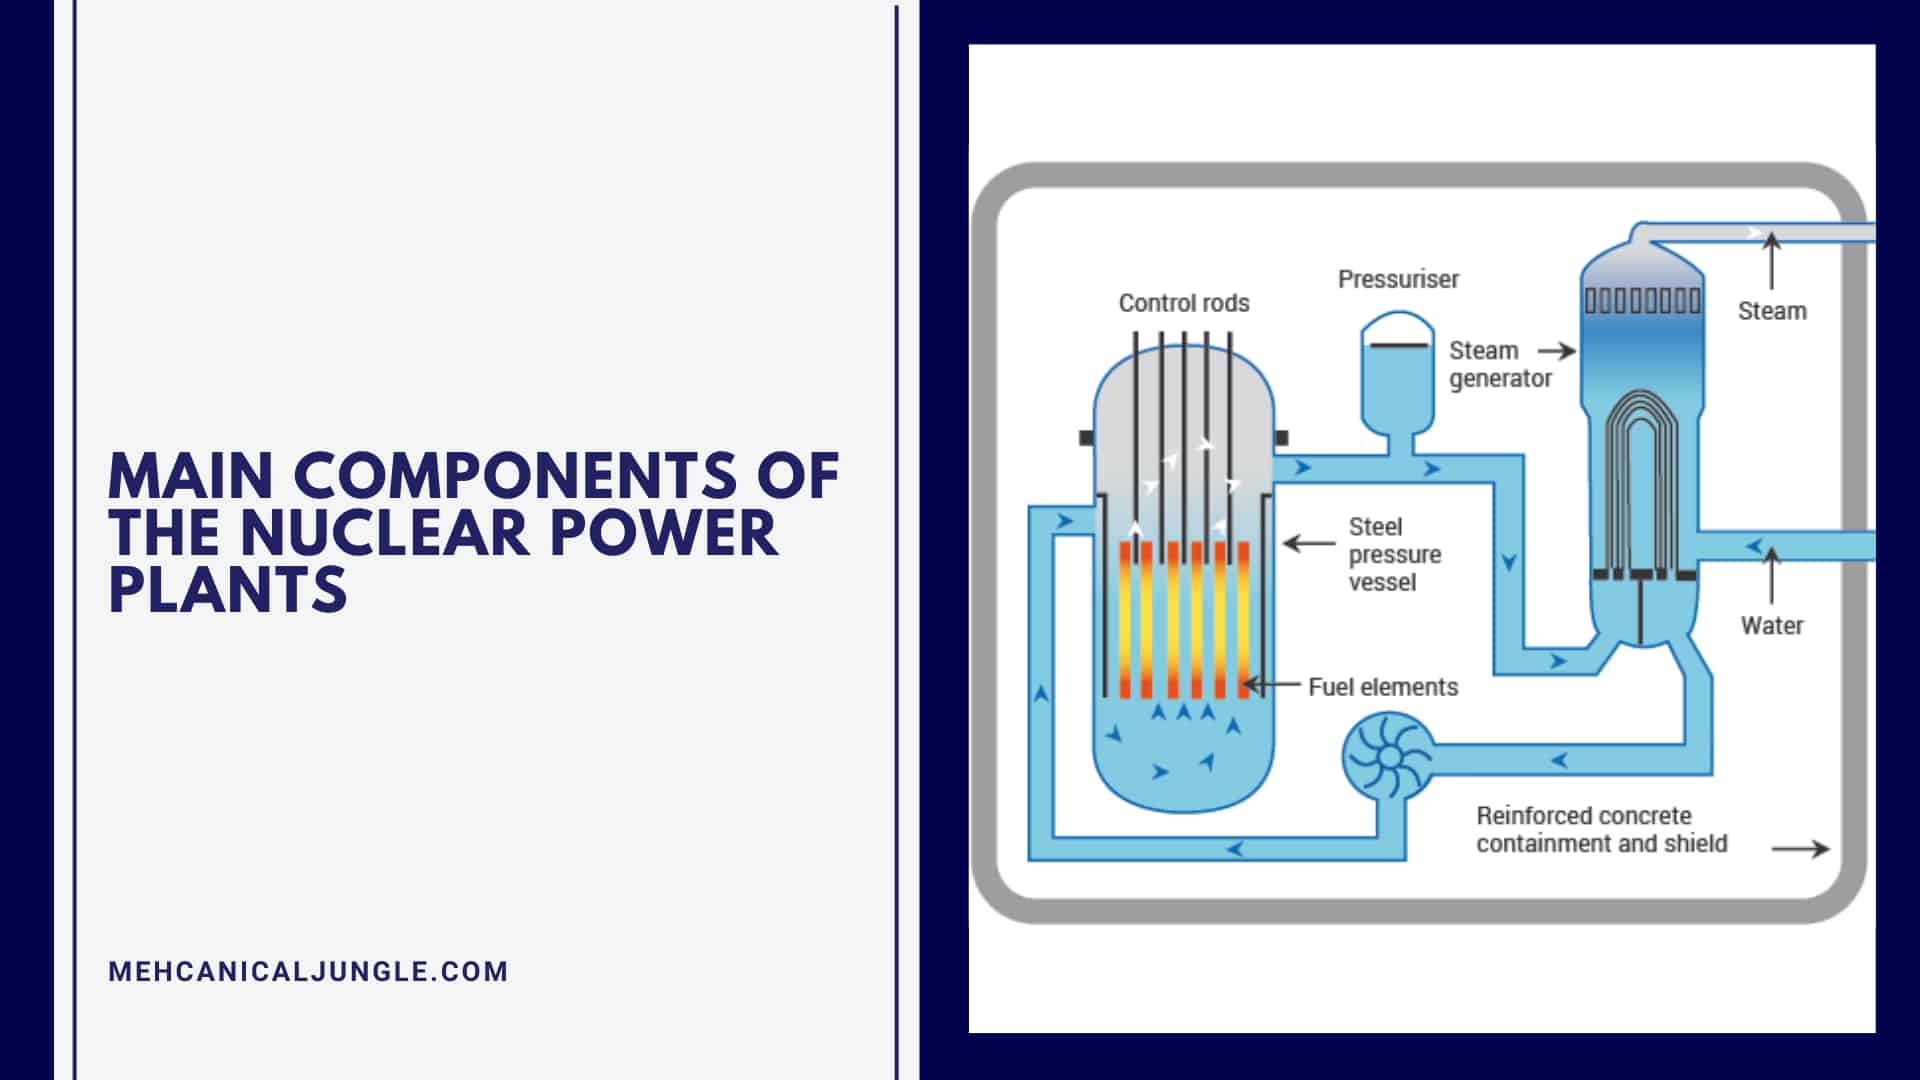 Main Components of the Nuclear Power Plants